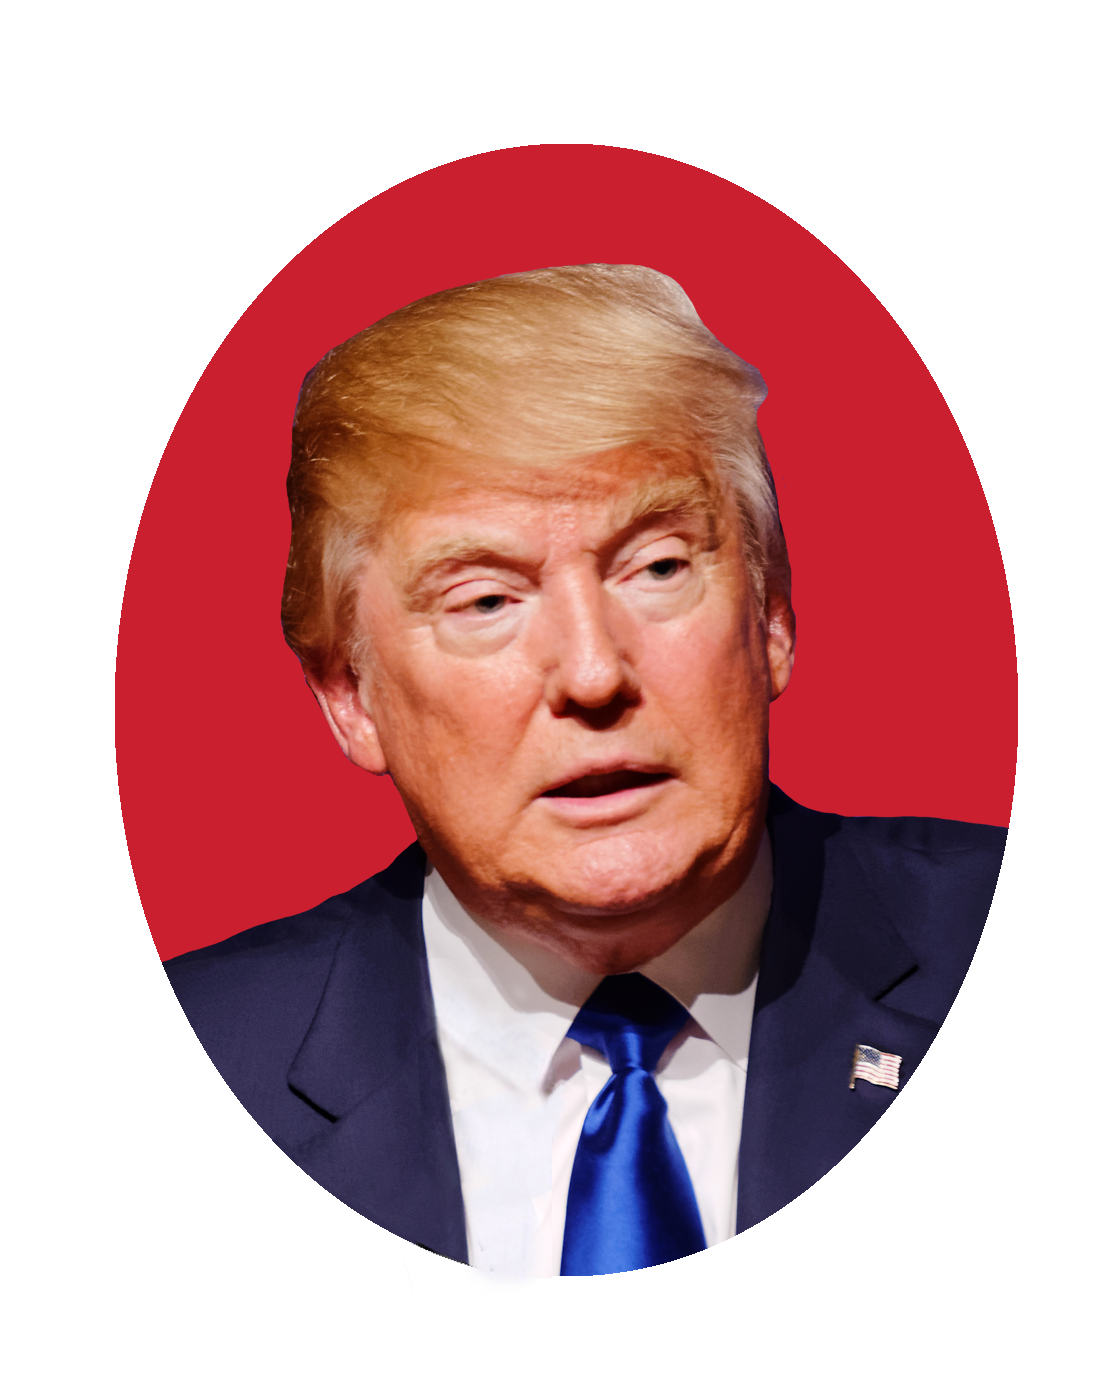 Donald Trump Oval Poster Icon PNG Best Image pngteam.com